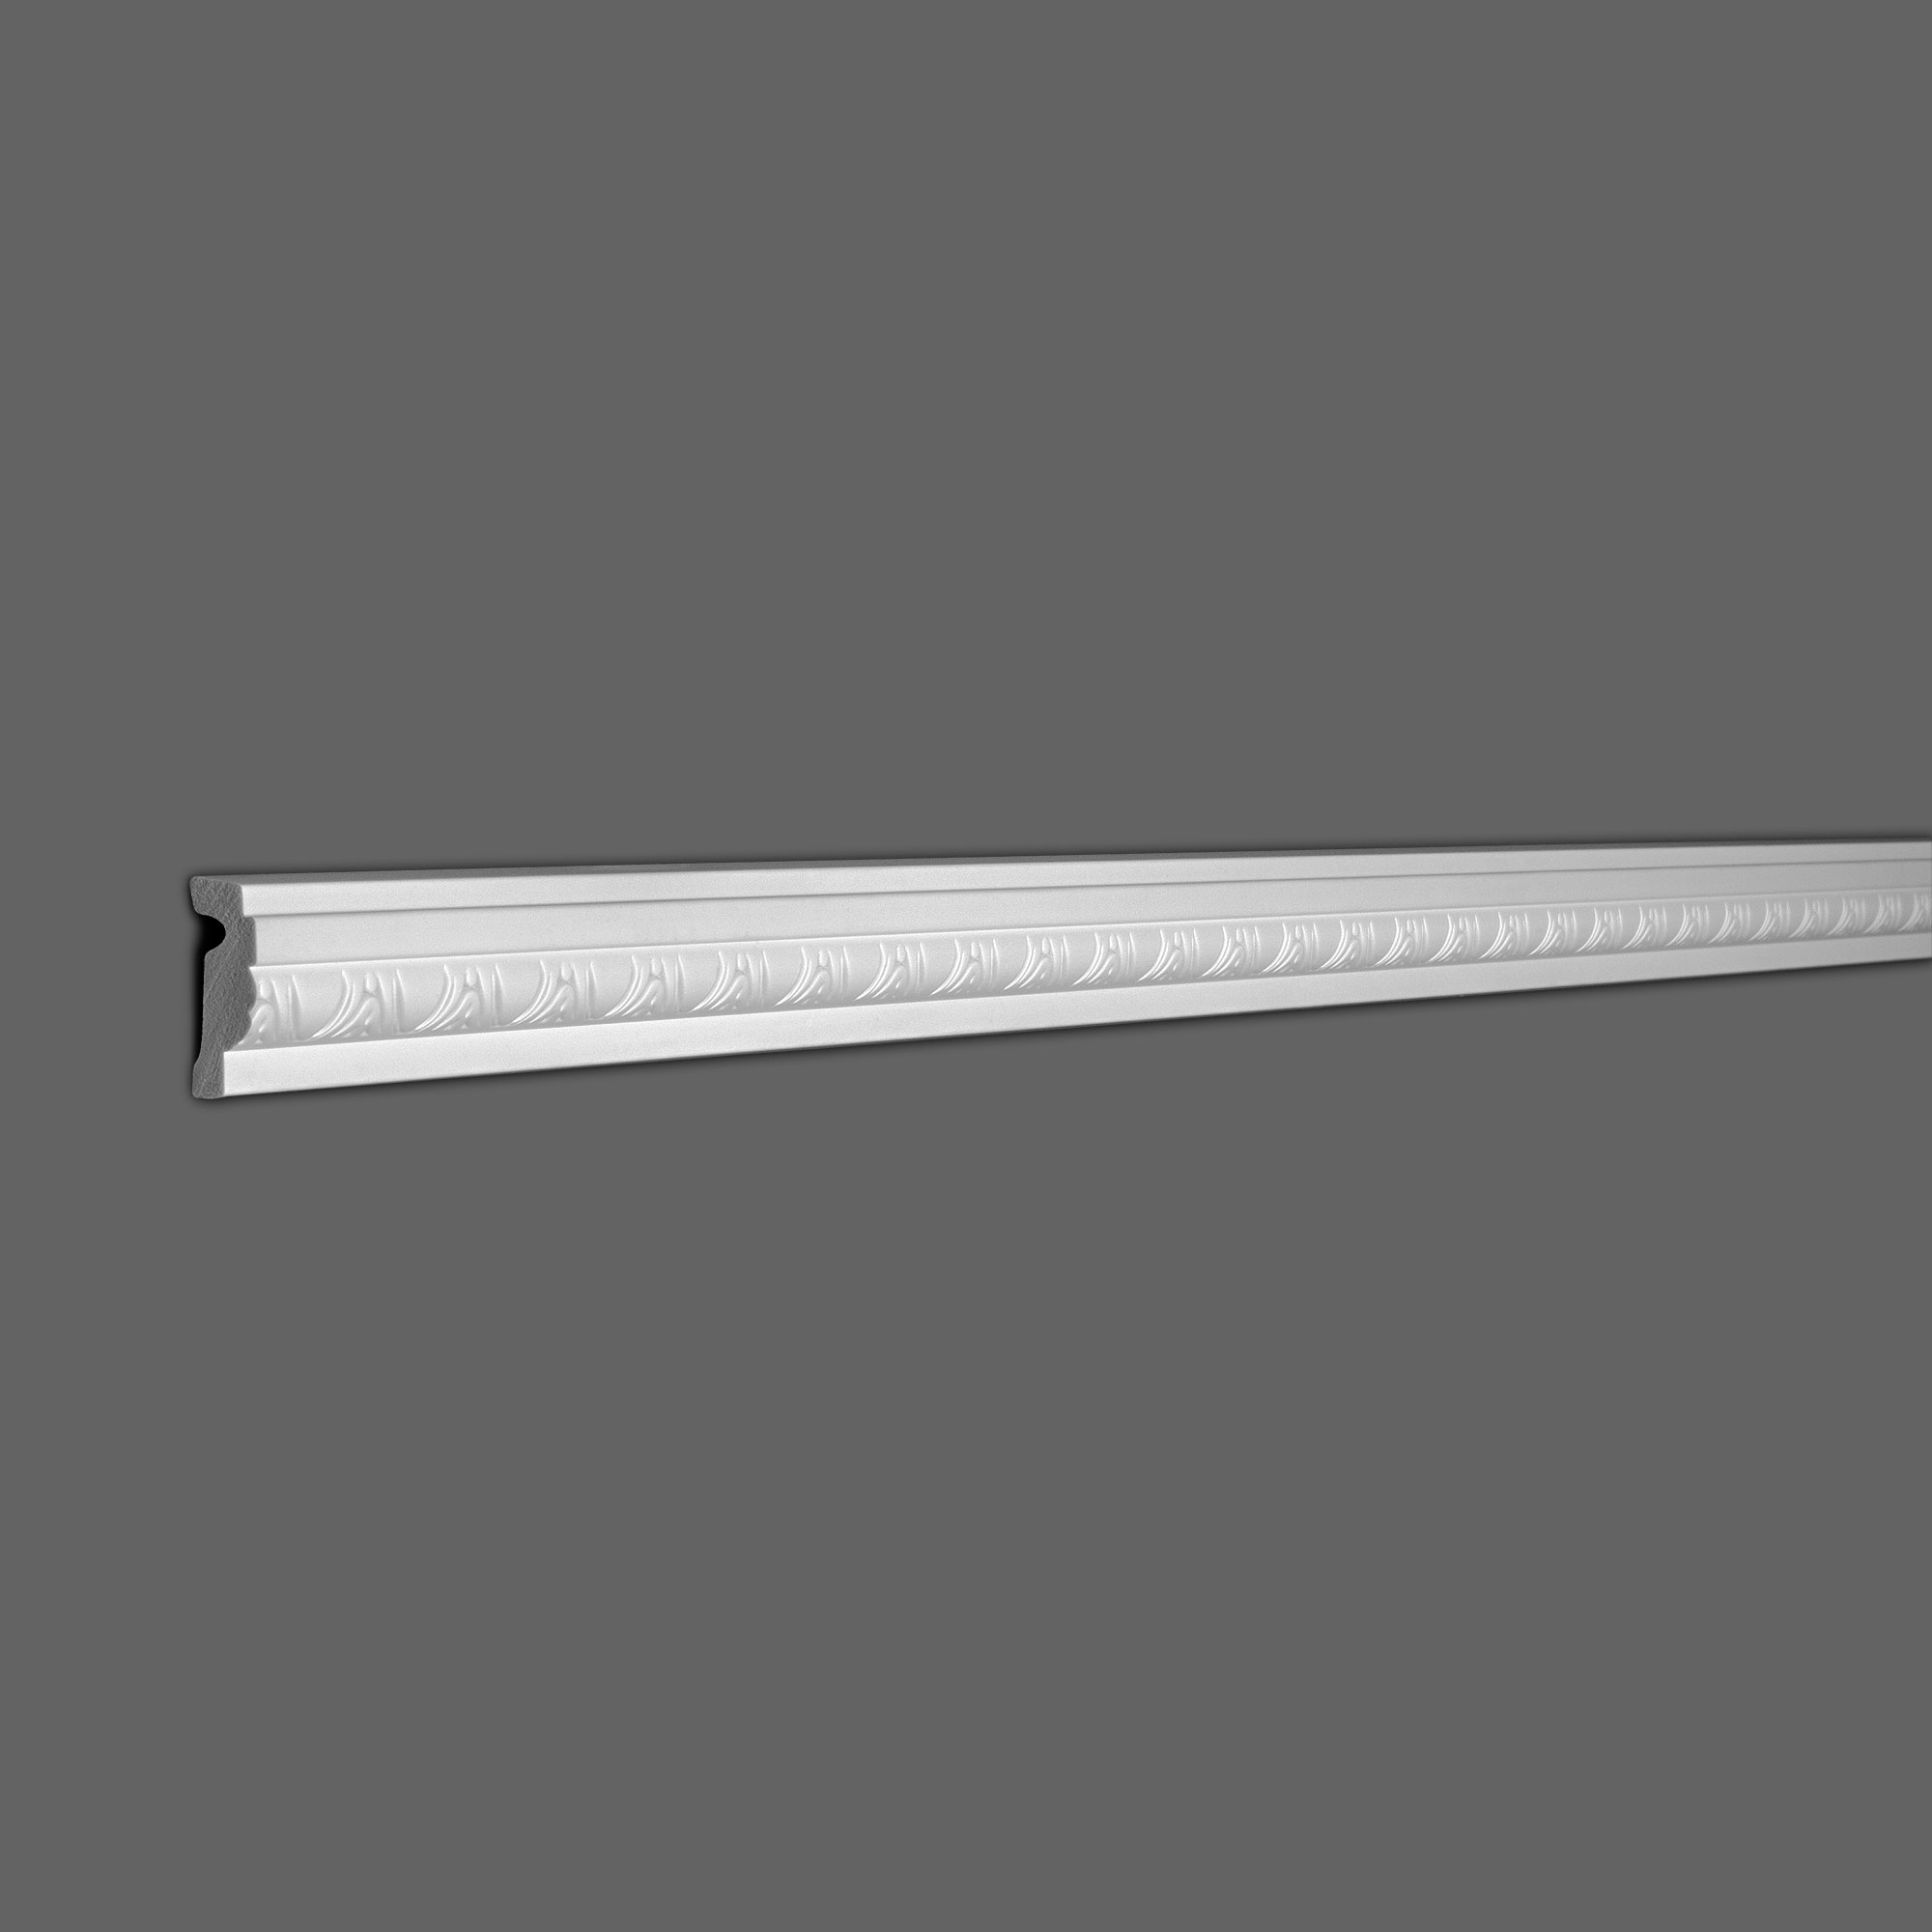 RPS-3319 H: 2" x Proj: 5/8" x L: 8' x Design Repeat: 1-3/4" Primed White Polymer Panel Moulding (7 Pack/54+Feet) - image 5 of 5